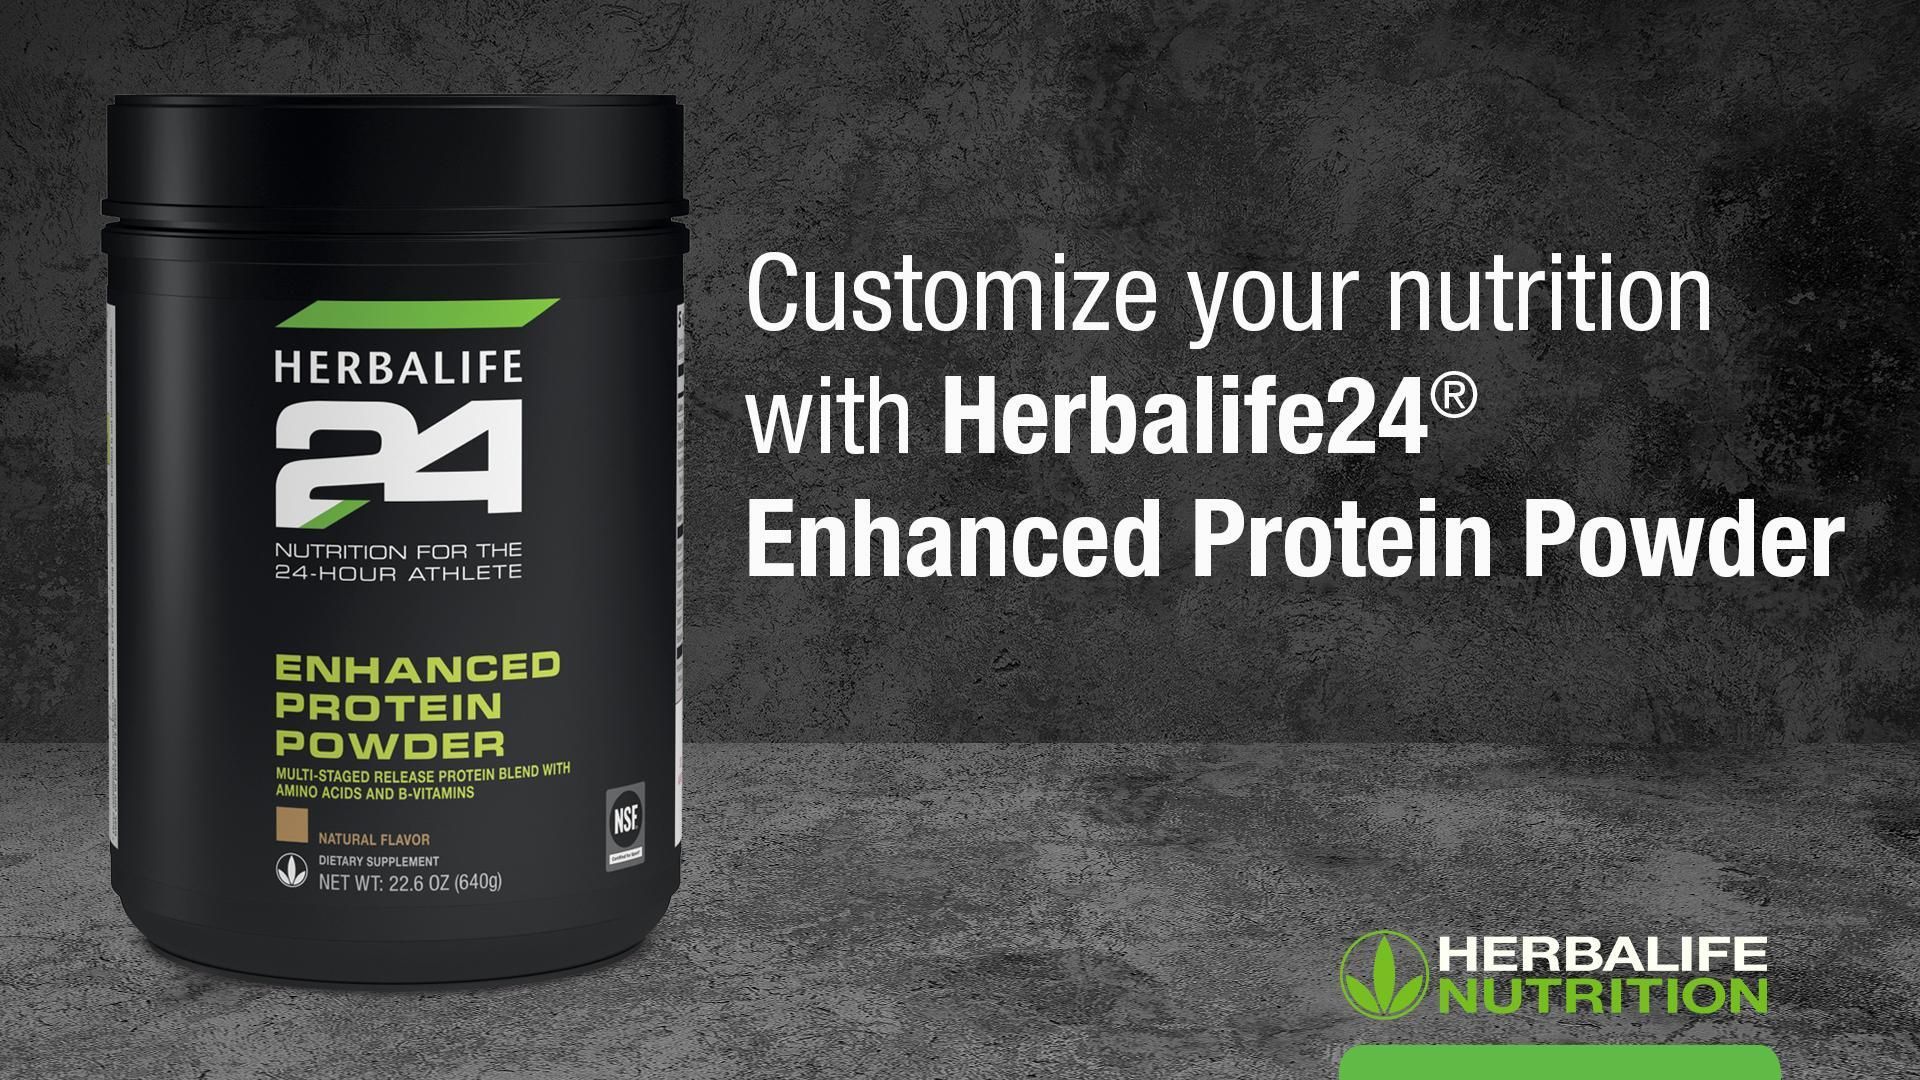 Herbalife24® Enhanced Protein Powder: Know the Products